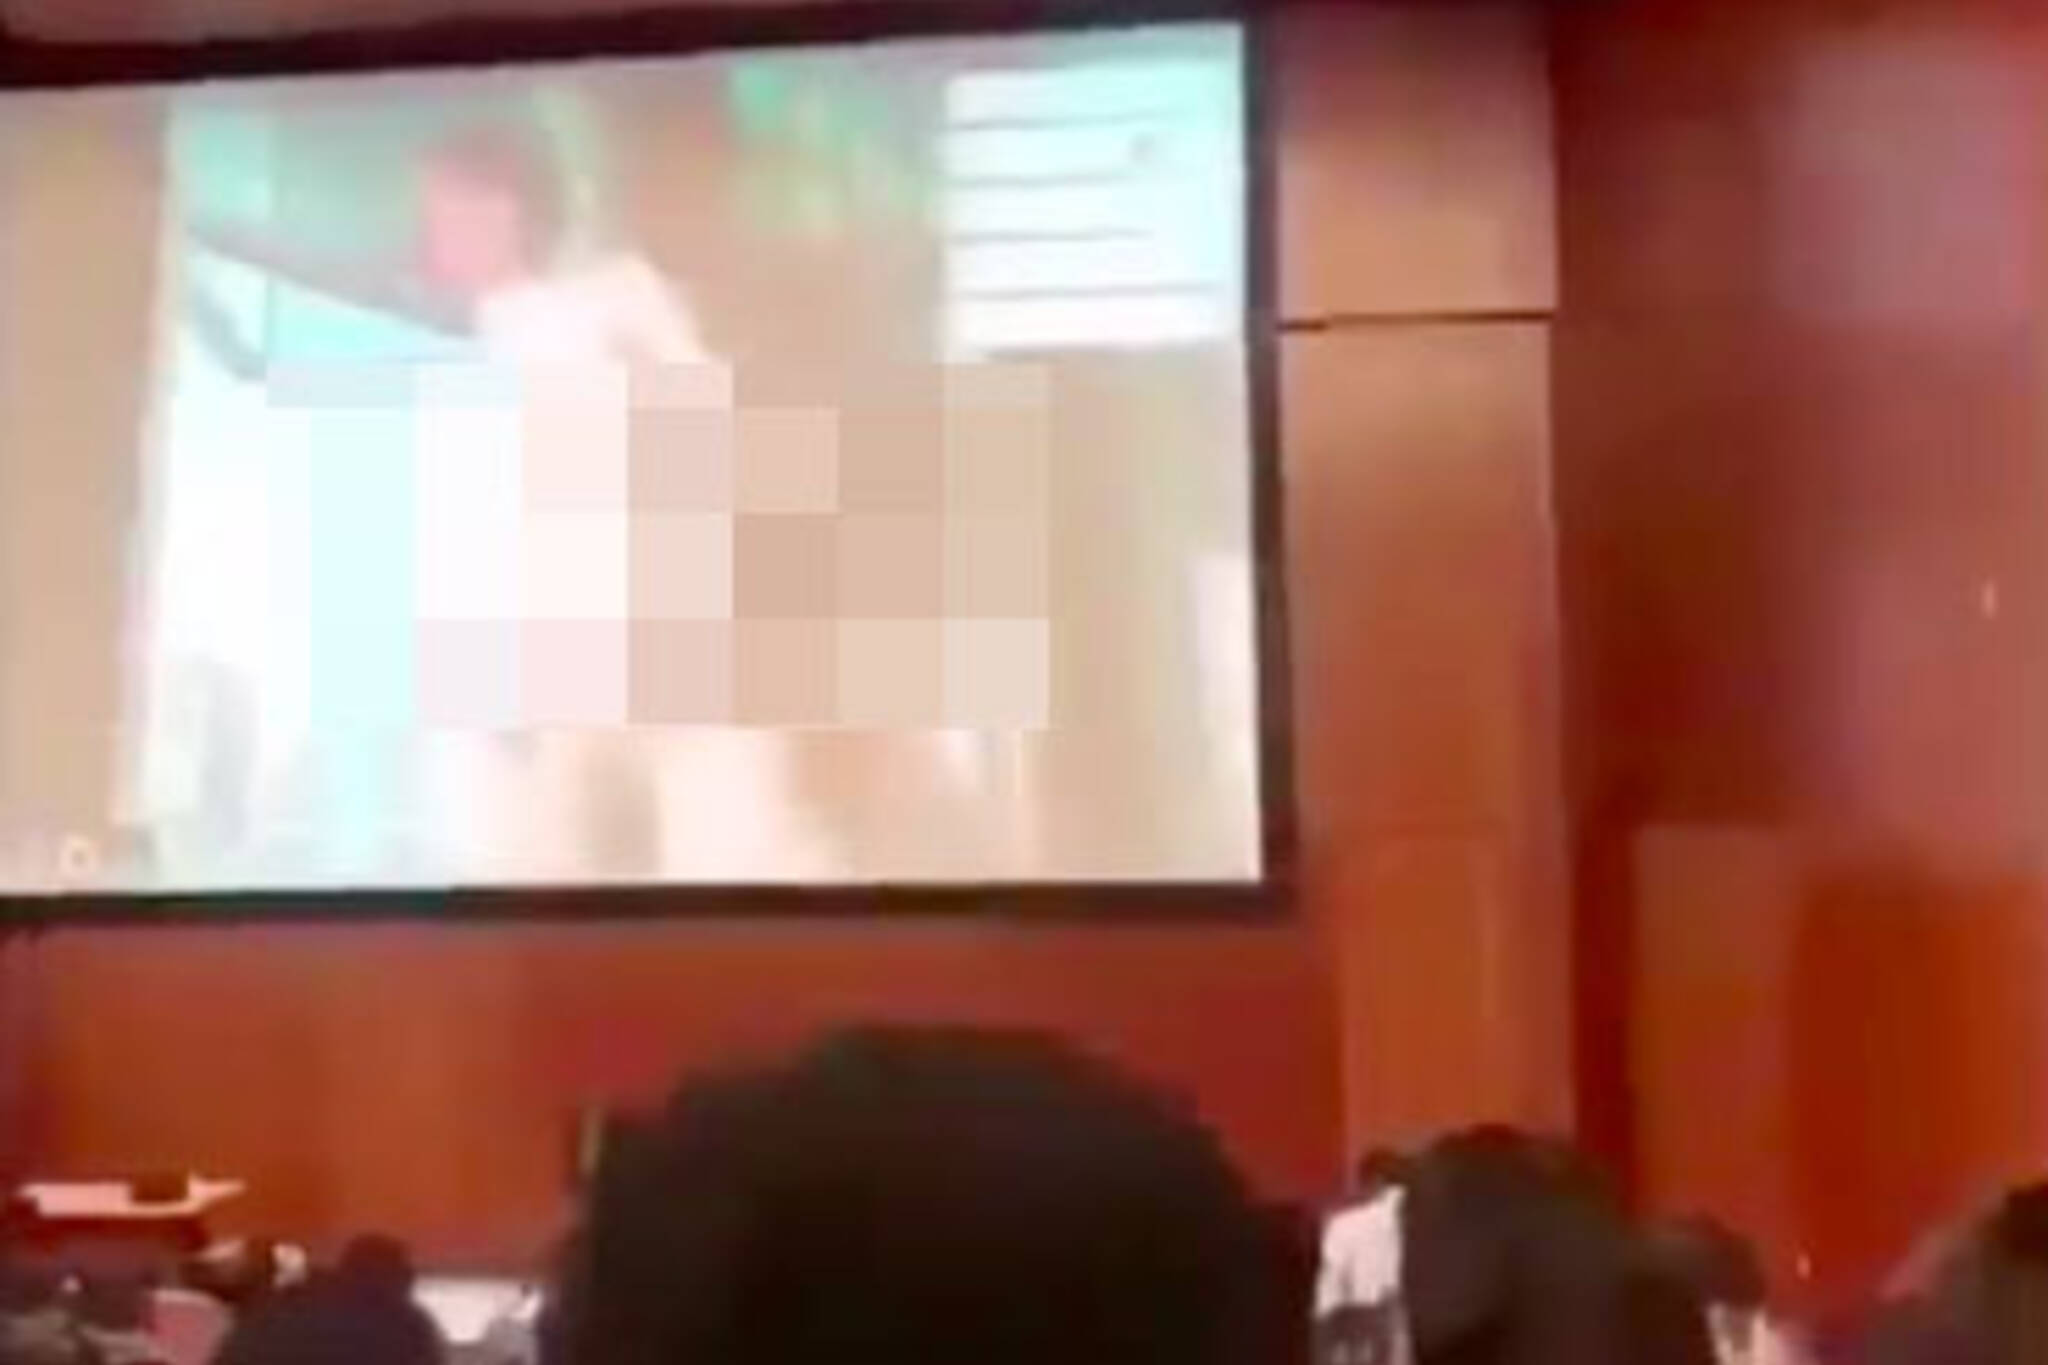 Professor mistakenly plays porn in packed U of T lecture hall